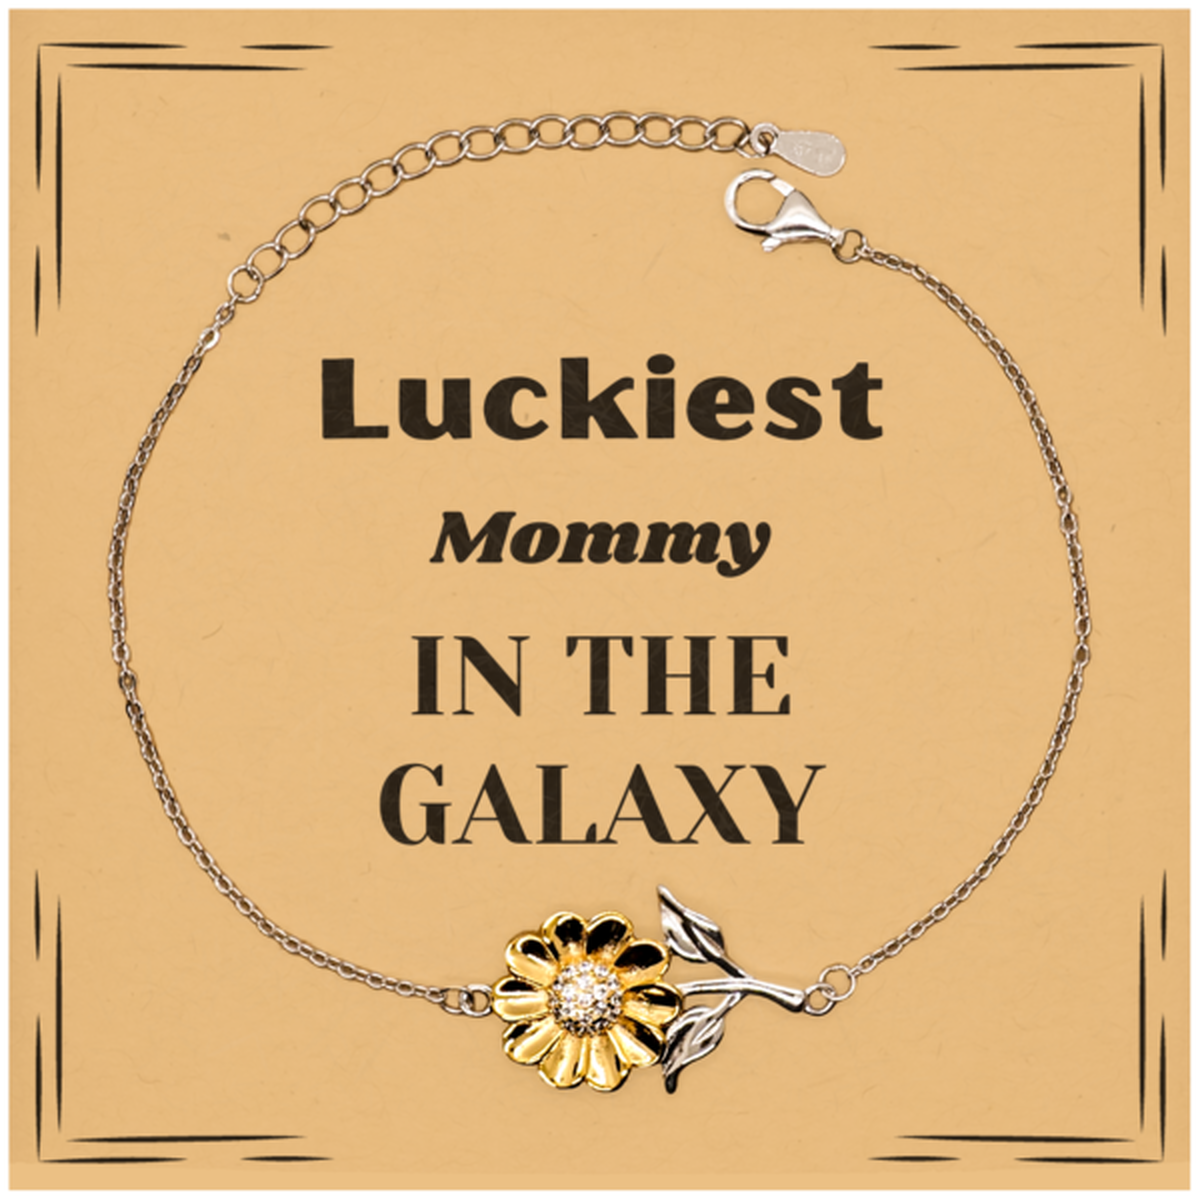 Luckiest Mommy in the Galaxy, To My Mommy Message Card Gifts, Christmas Mommy Sunflower Bracelet Gifts, X-mas Birthday Unique Gifts For Mommy Men Women